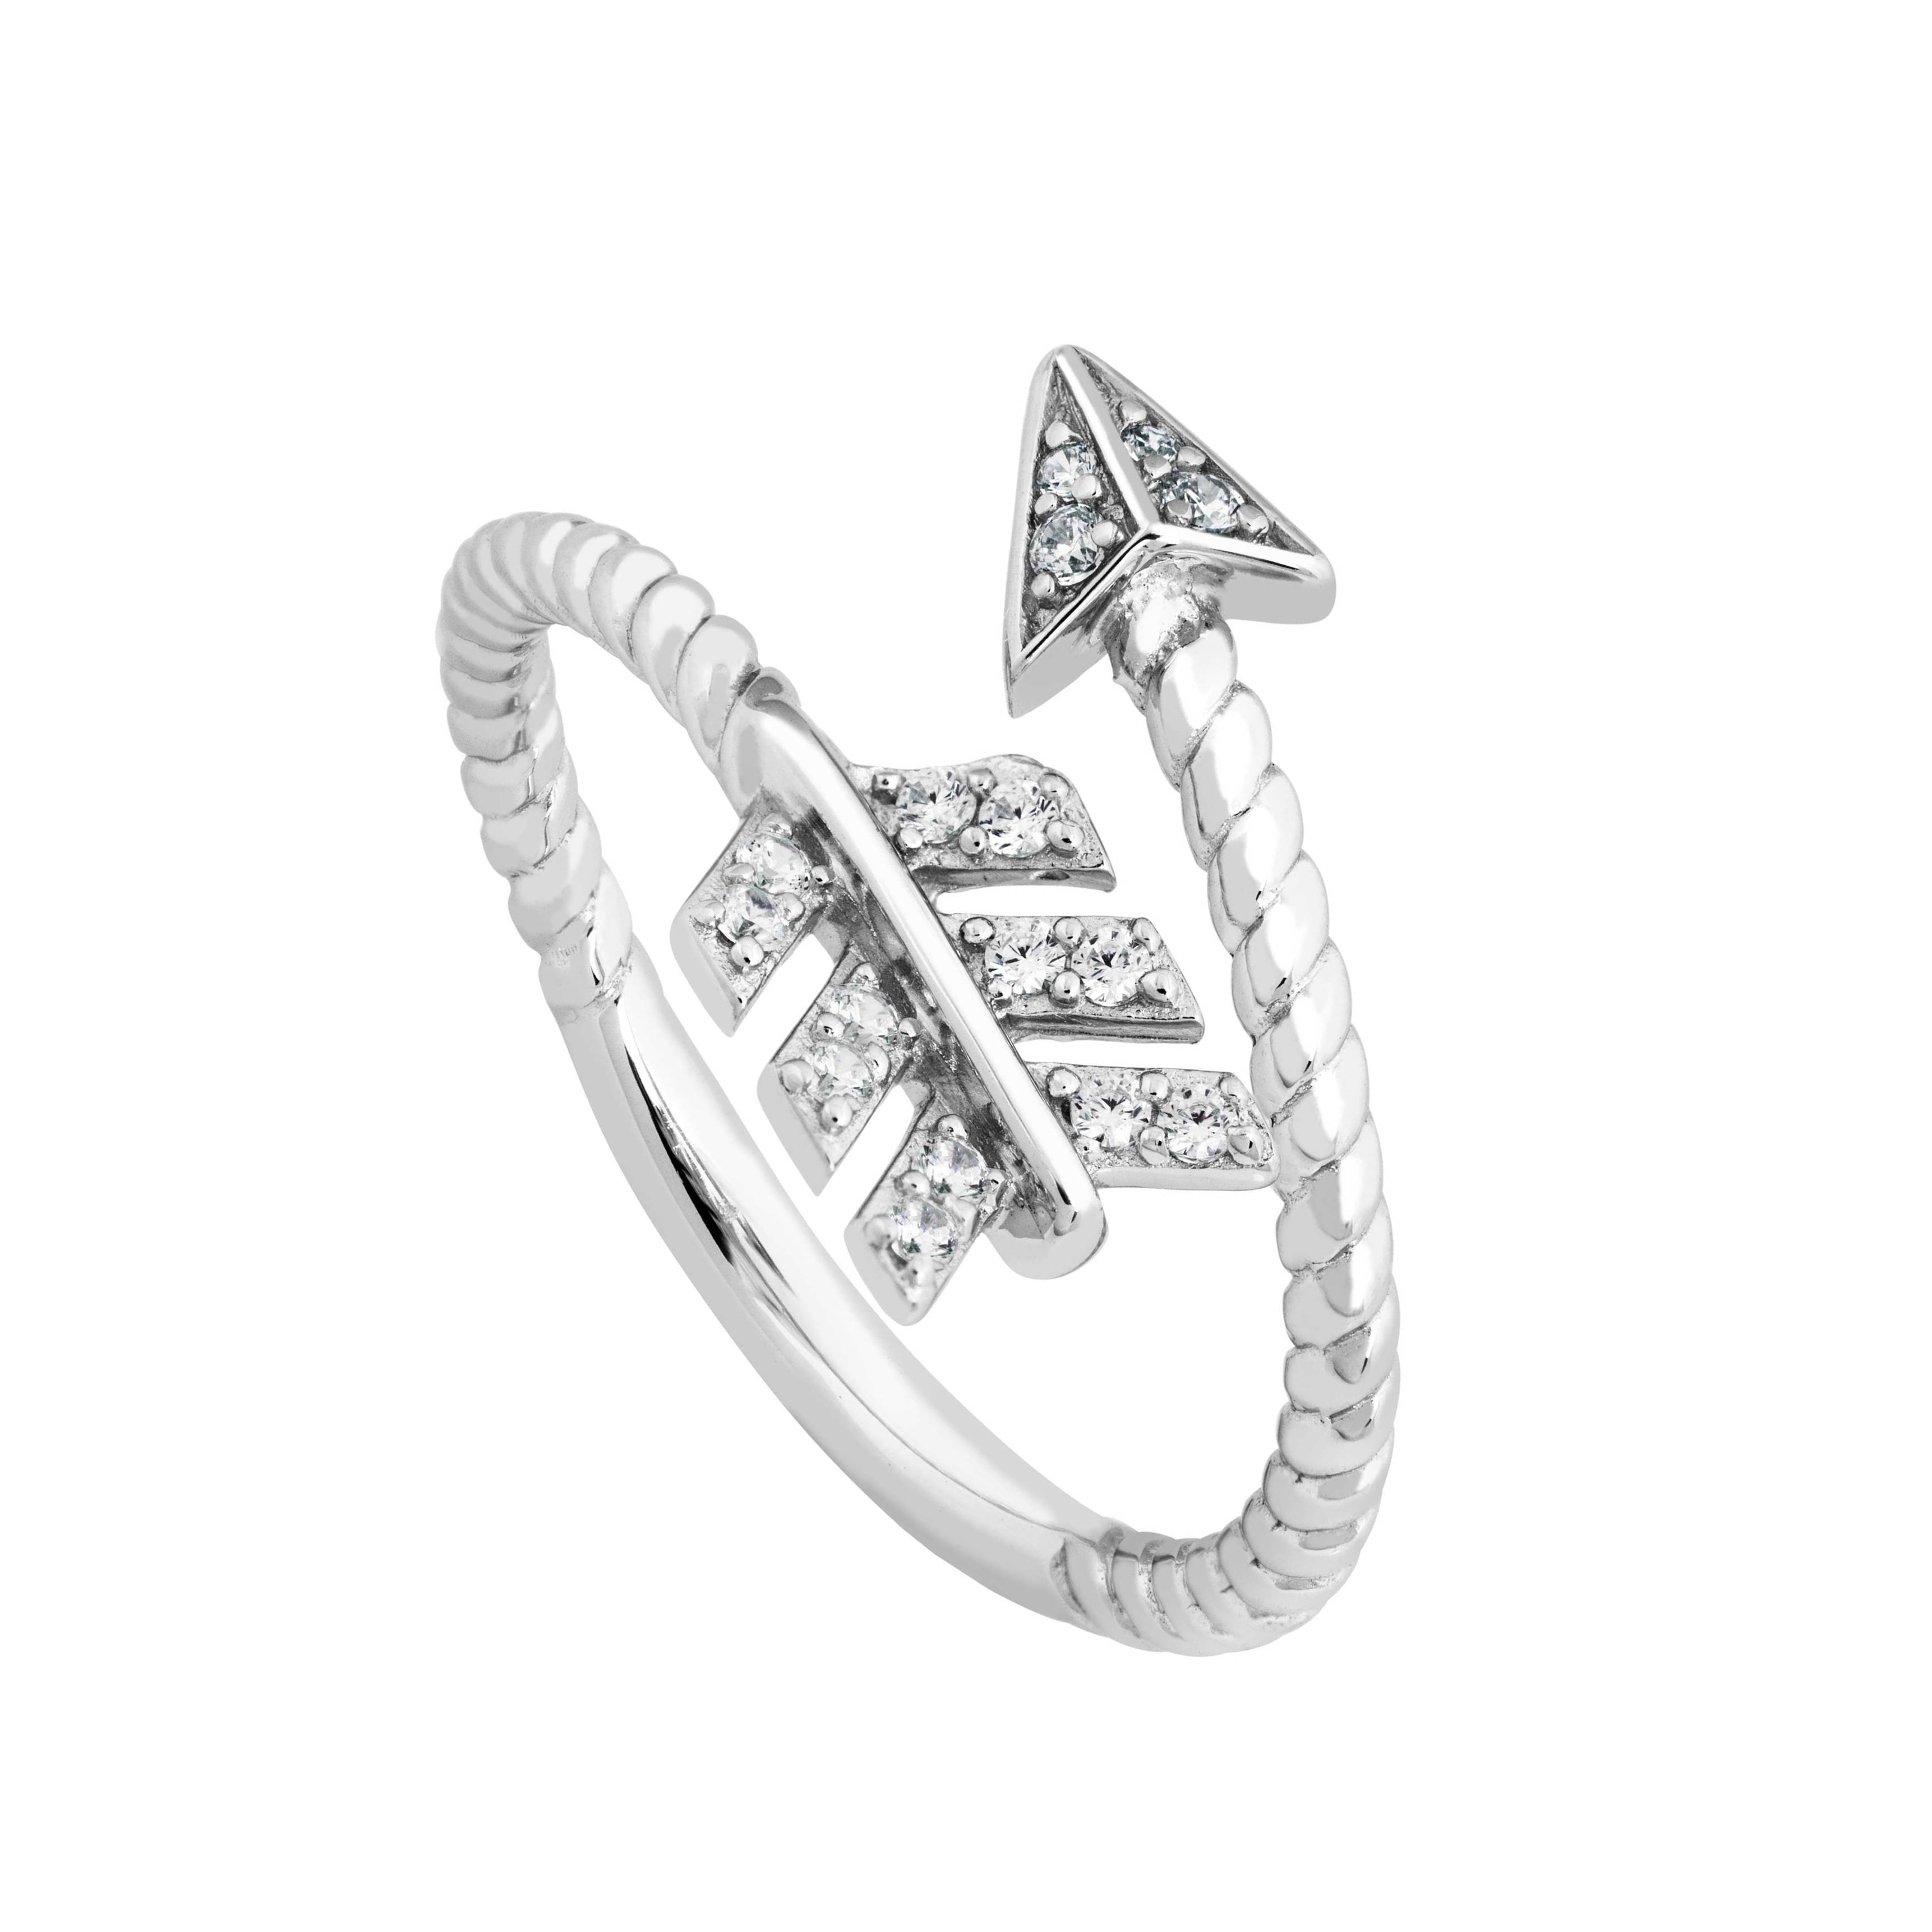 Rope Trim Arrow with CZ's Bypass Ring, Sterling Silver. 